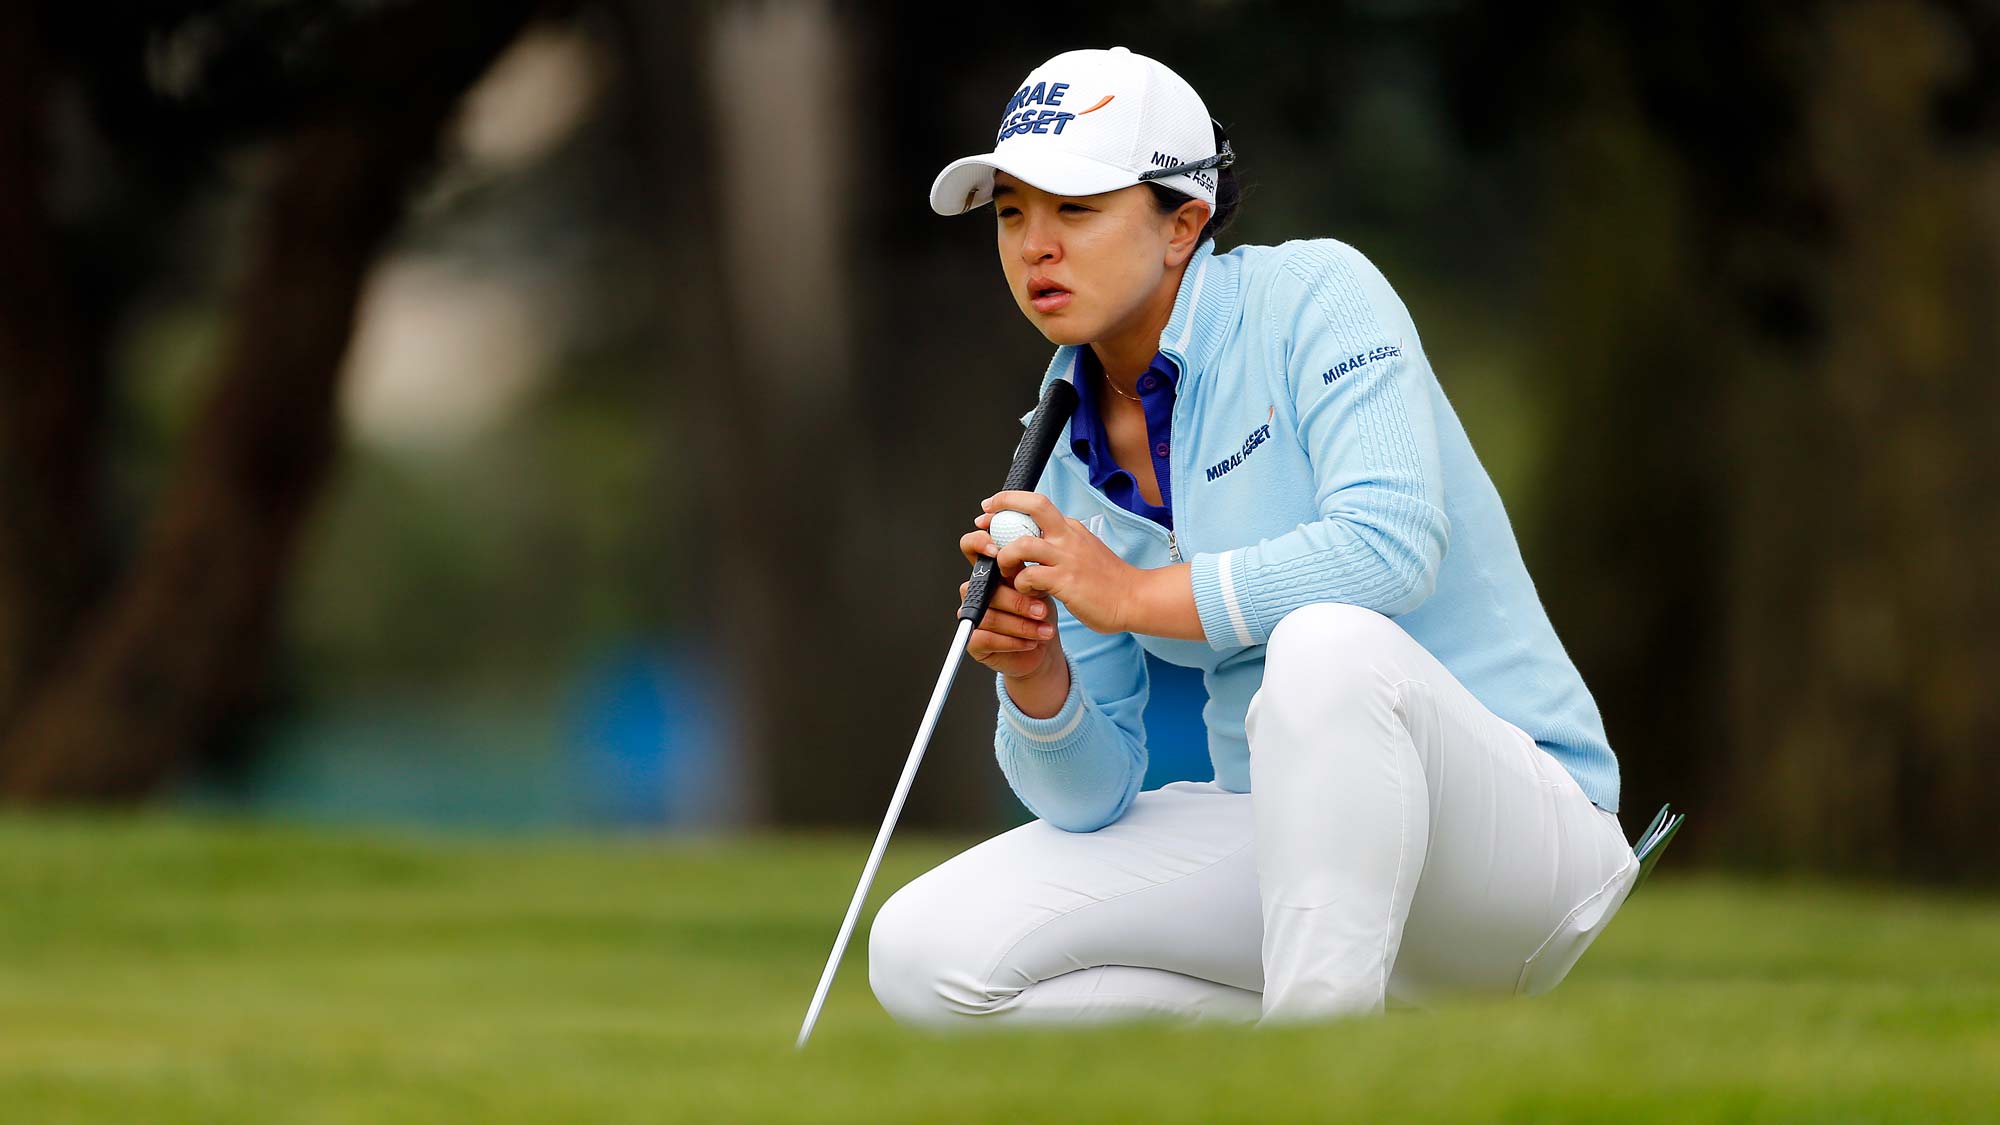 Sei Young Kim of South Korea lines up a putt on the 10th hole during the third round of the LPGA Mediheal Championship